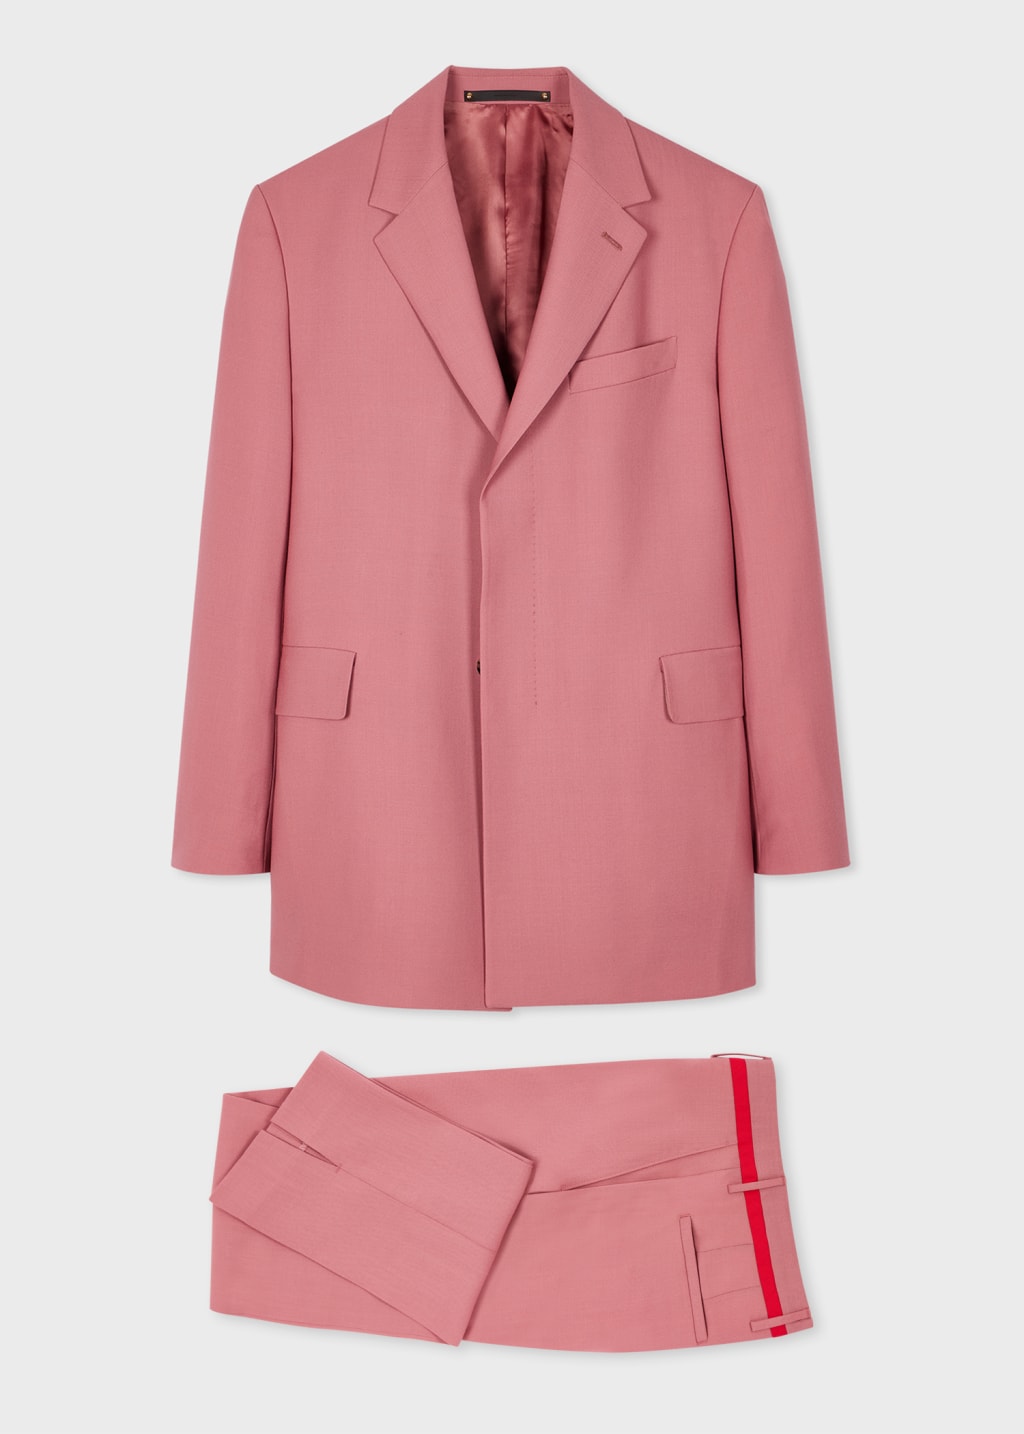 Model View - Pink Fresco Wool Suit by Paul Smith